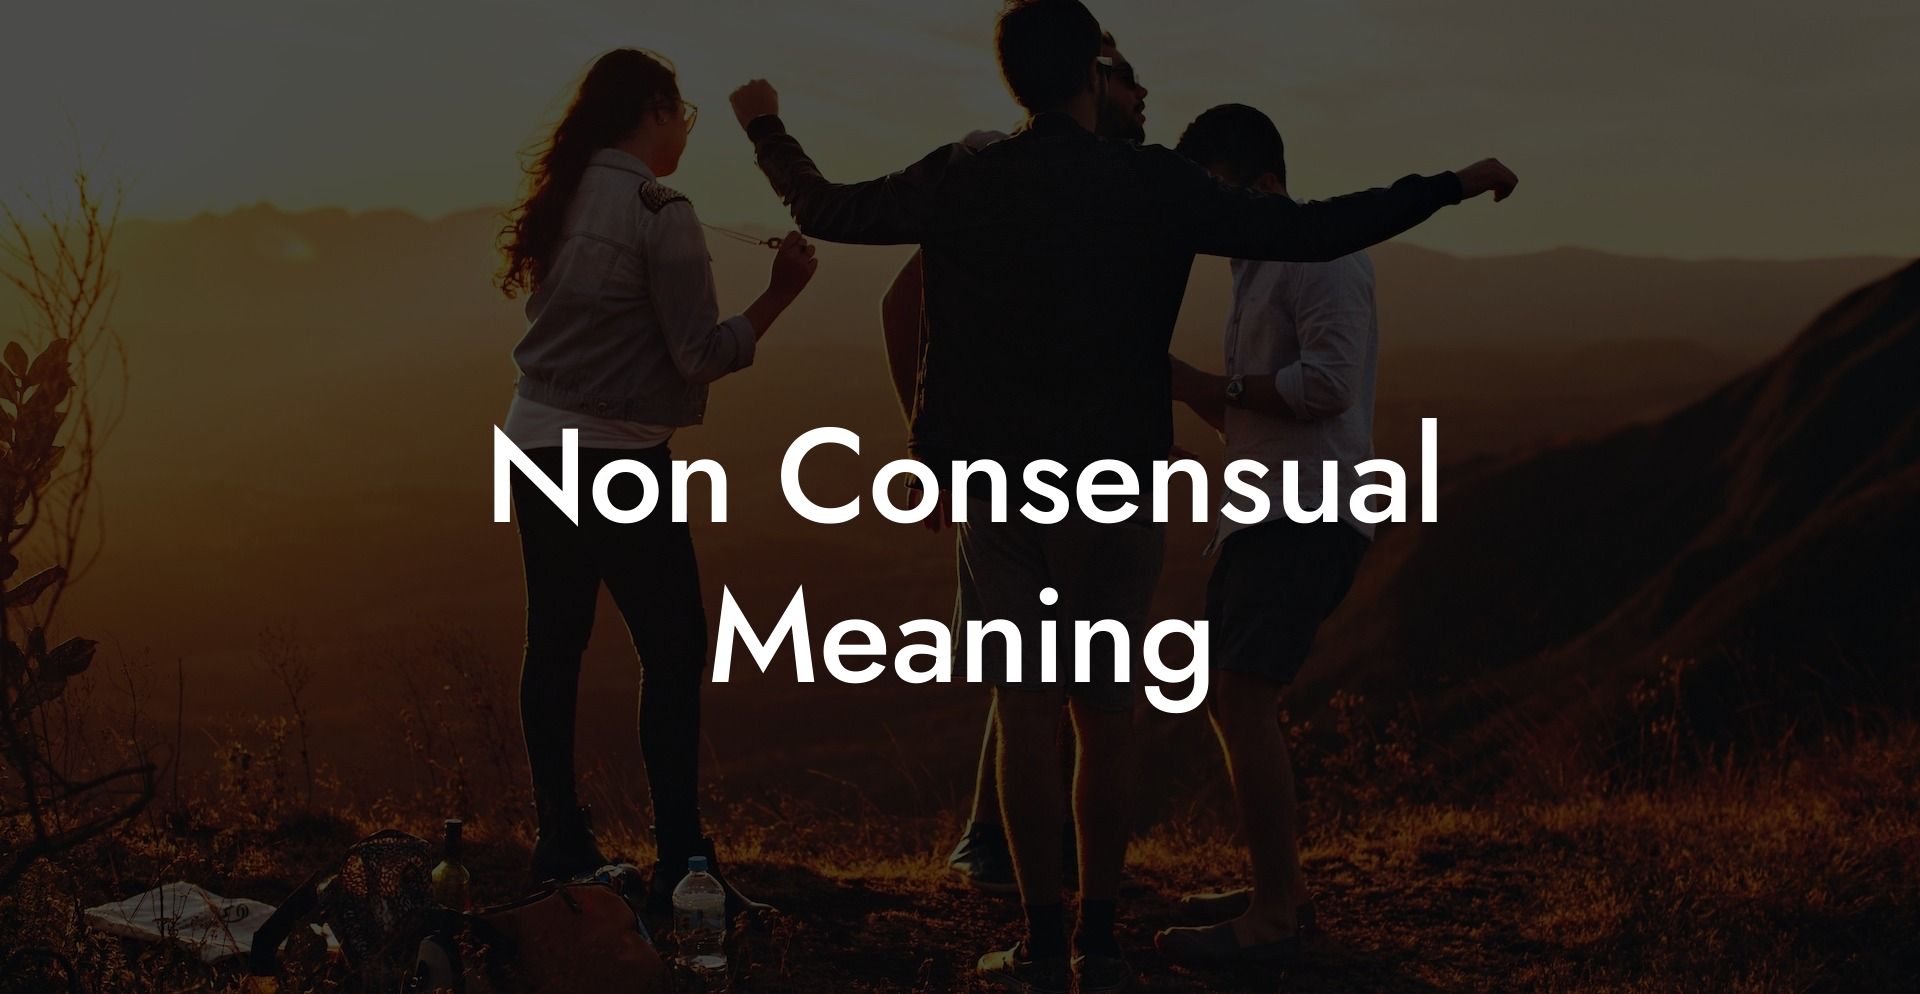 Non Consensual Meaning